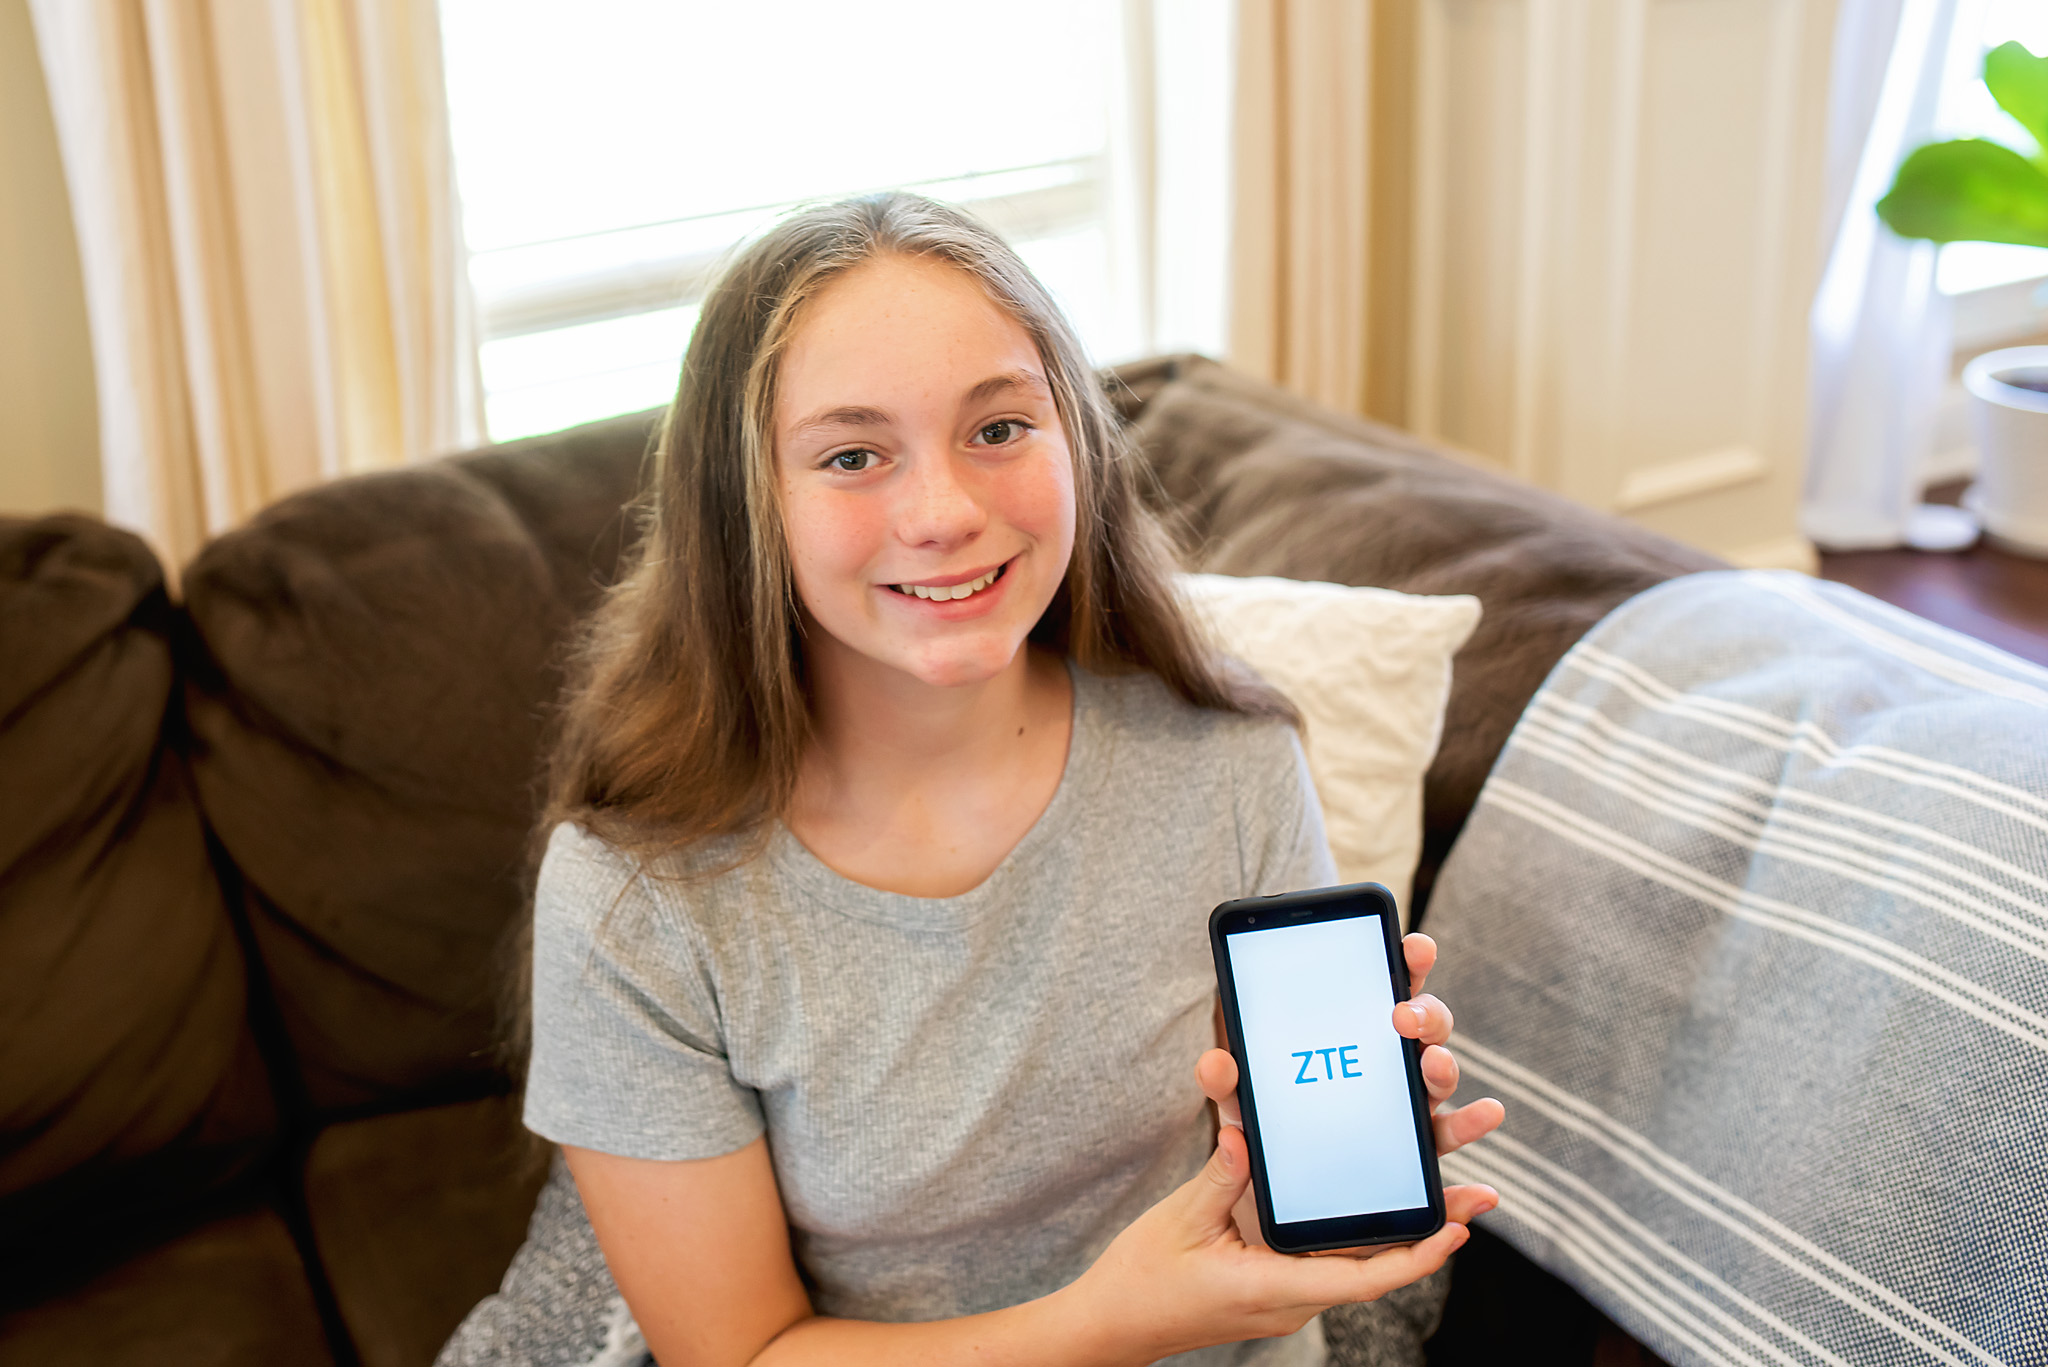 Why I Chose A Gabb Wireless Kid-Safe Cell Phone For My Daughter + PROMO CODE